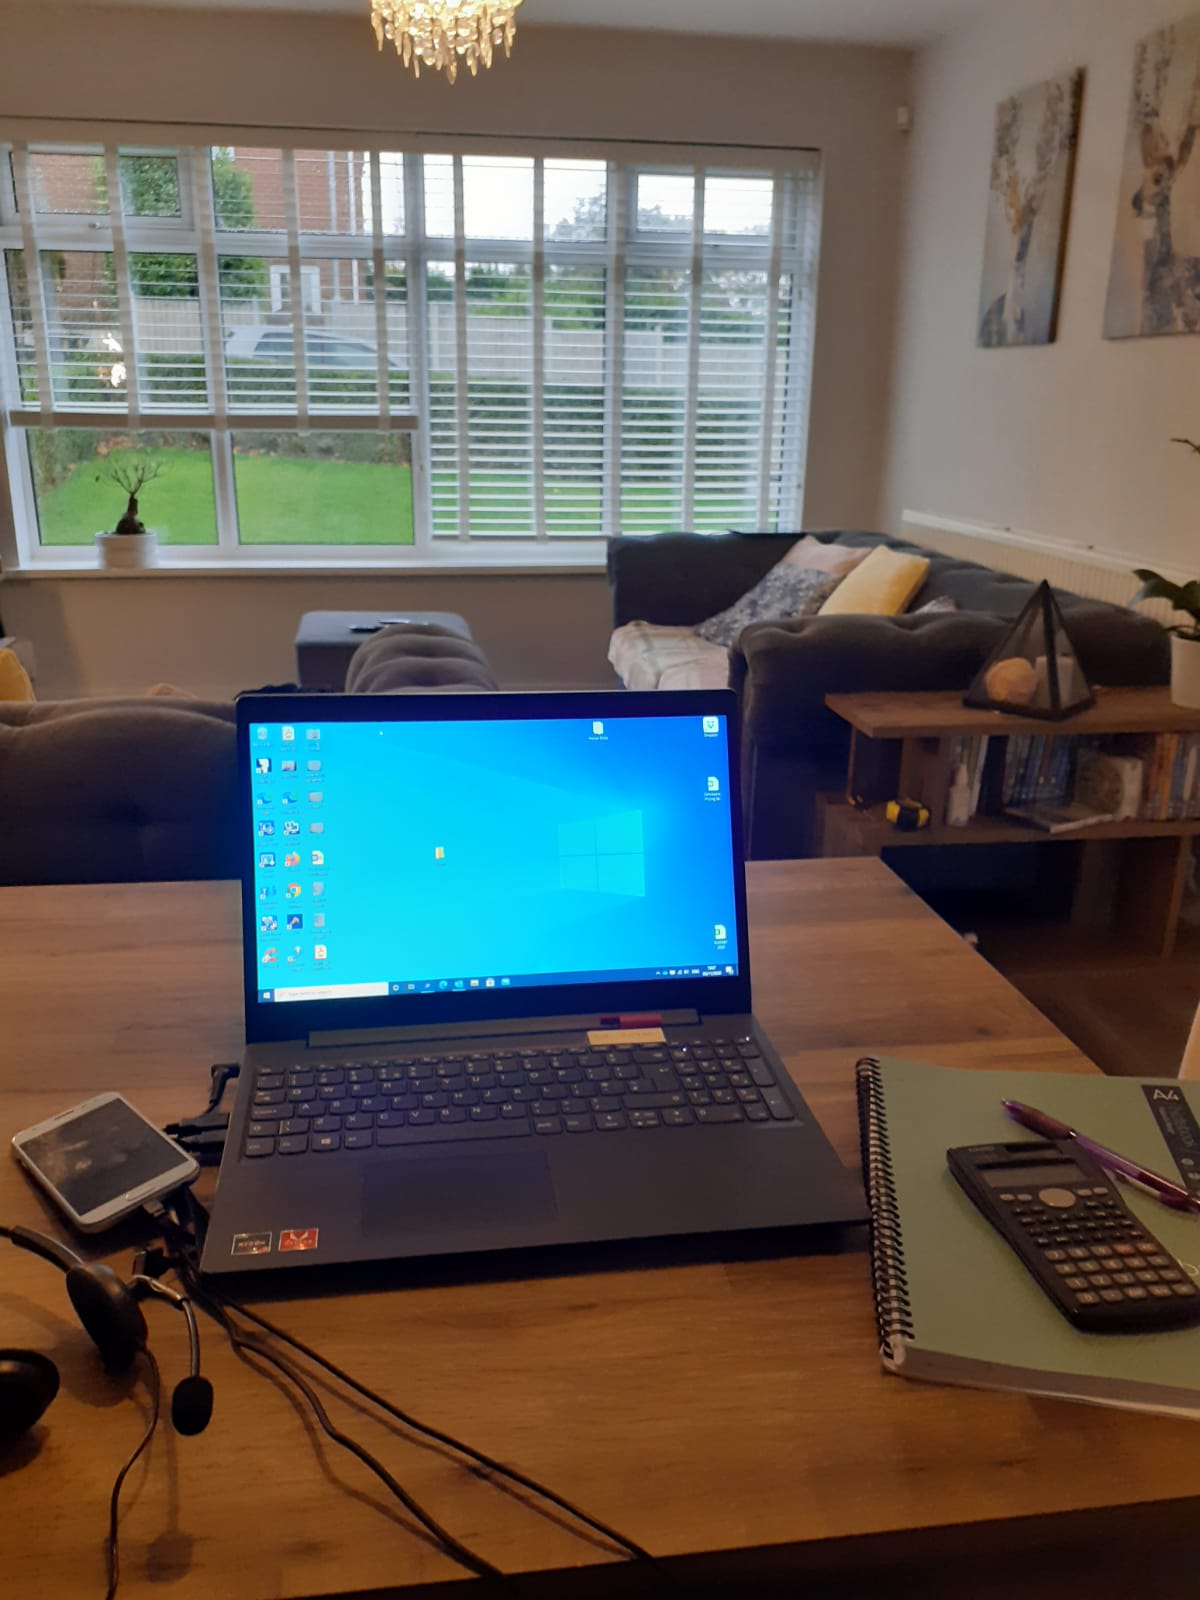 Laptop, notebook and calculator on table in front of sofas and window